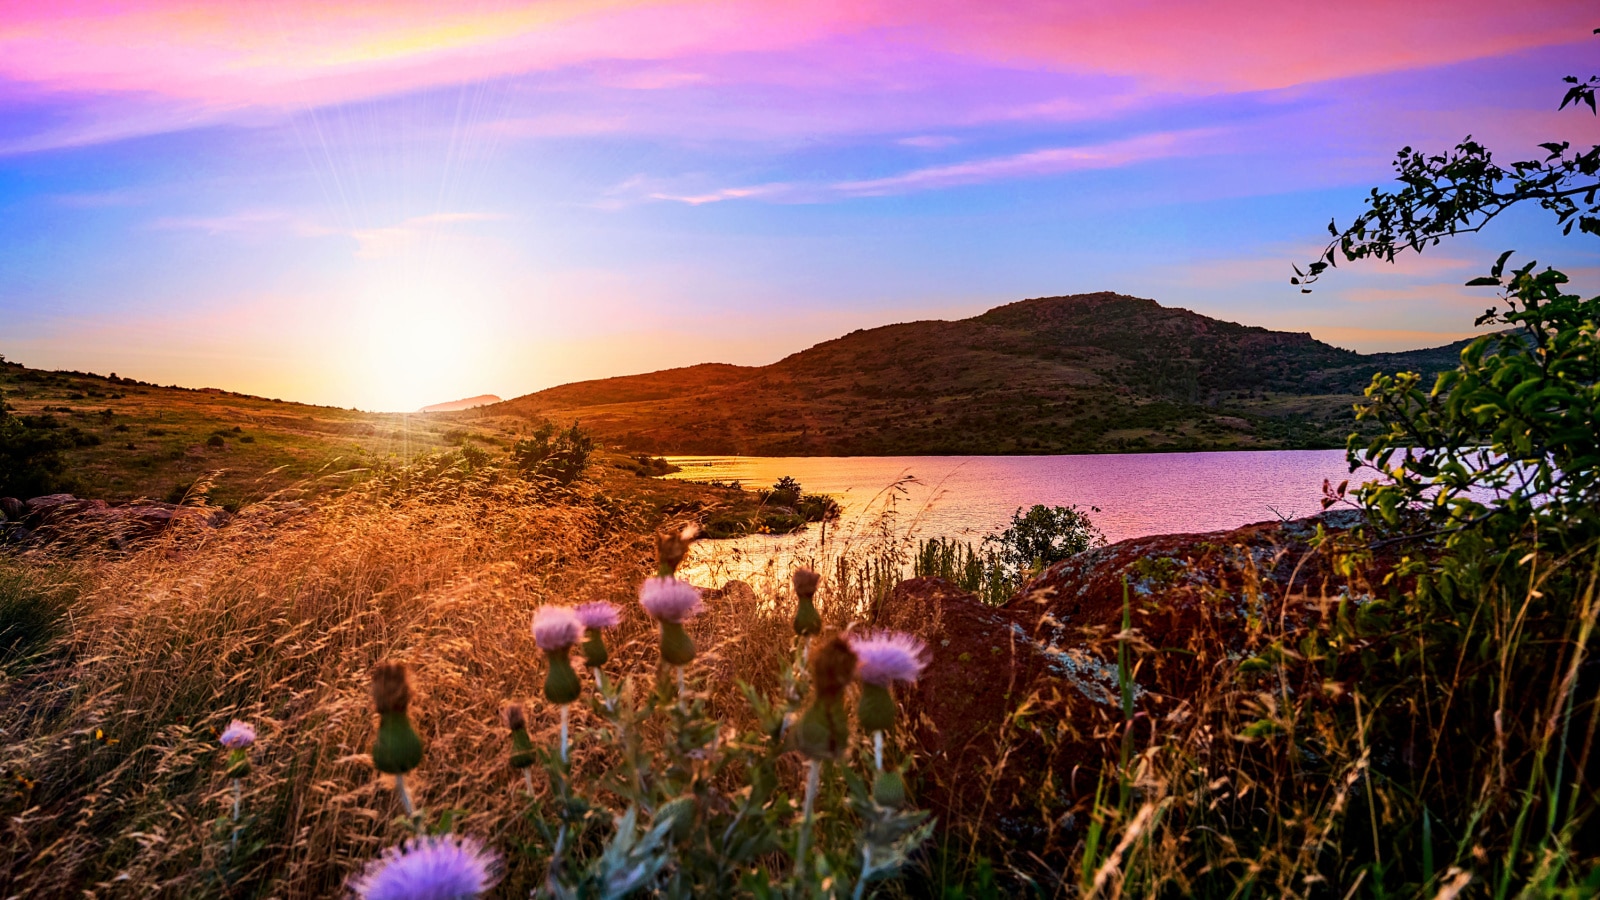 Violet hour at sunset in the valley of Wichita Mountains Wildlife Refuge near Lawton, Oklahoma, USA.